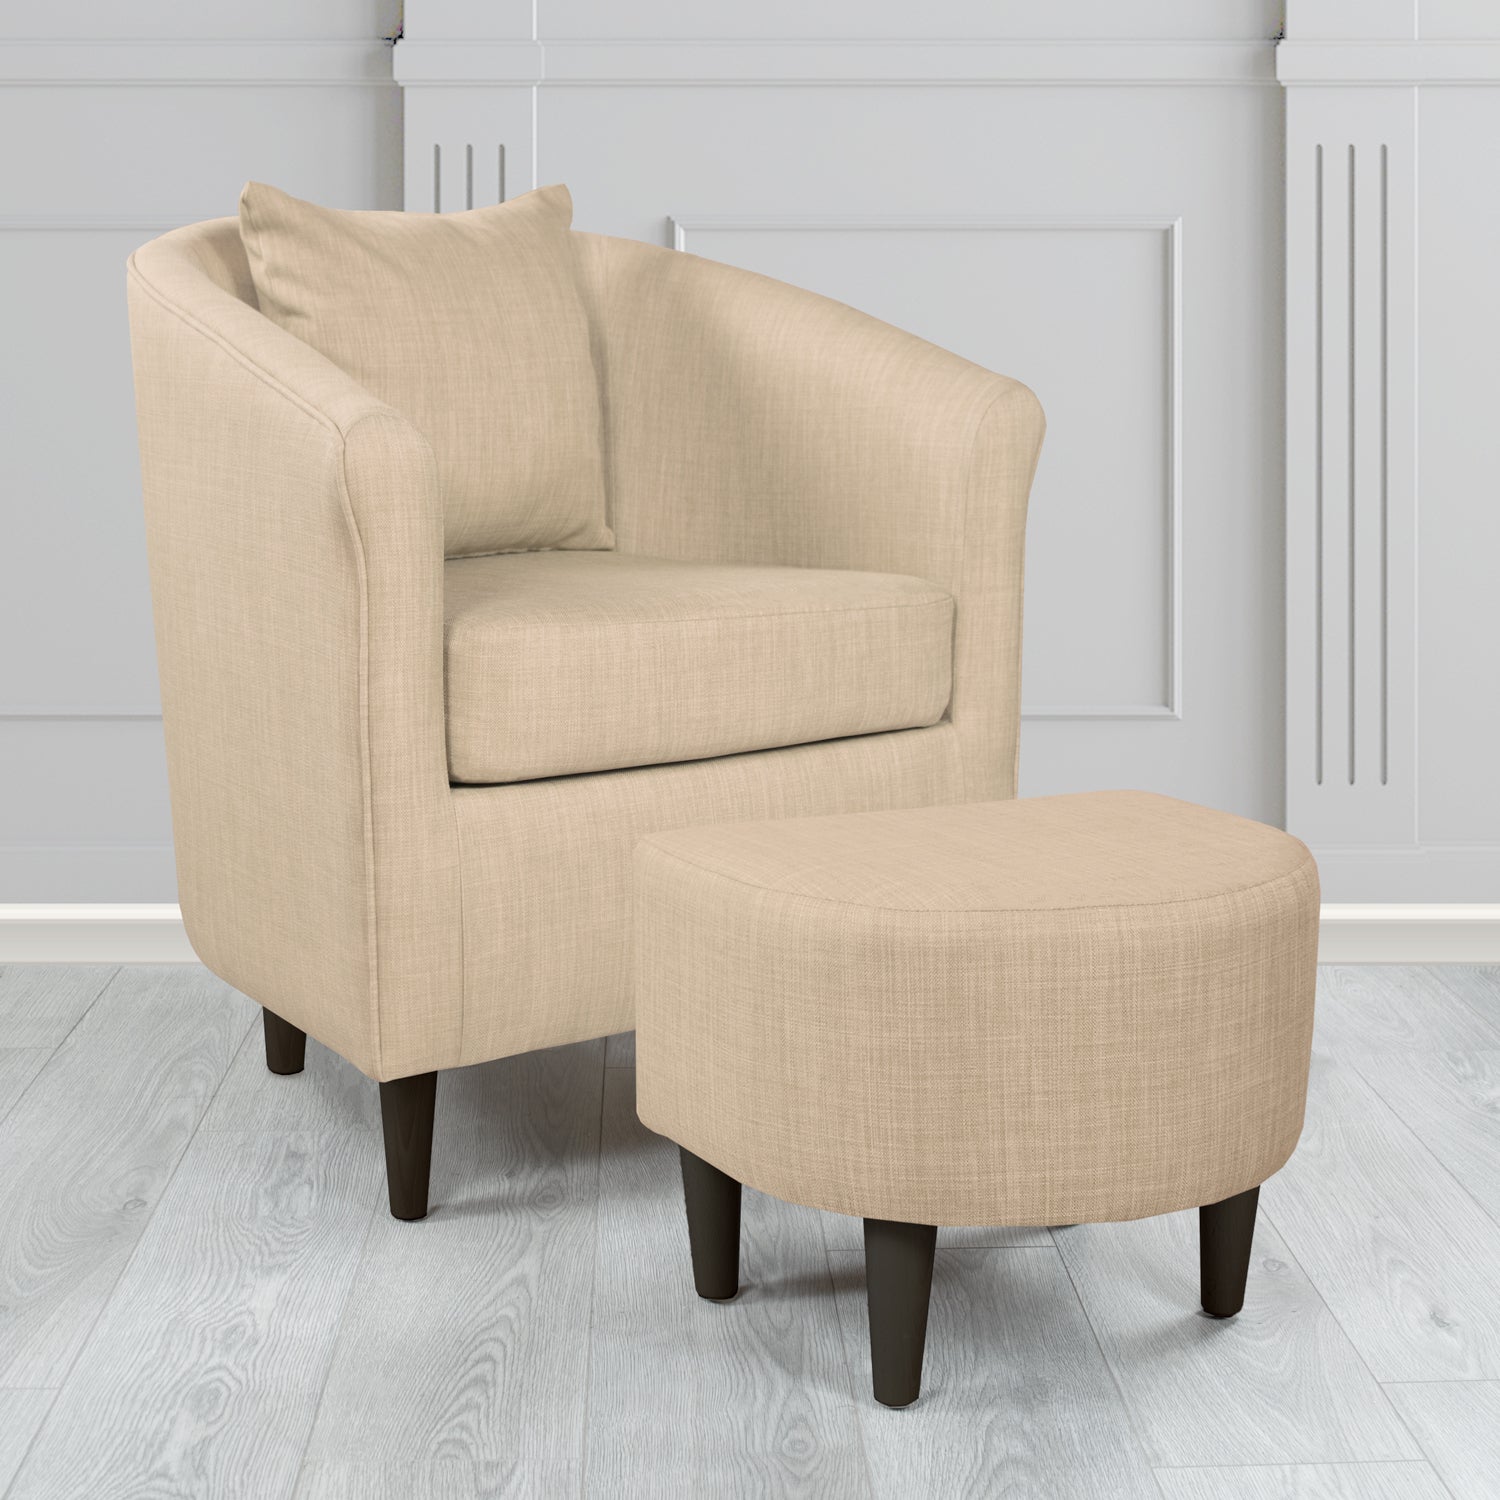 St Tropez Charles Sand Plain Linen Fabric Tub Chair & Footstool Set with Scatter Cushion - The Tub Chair Shop